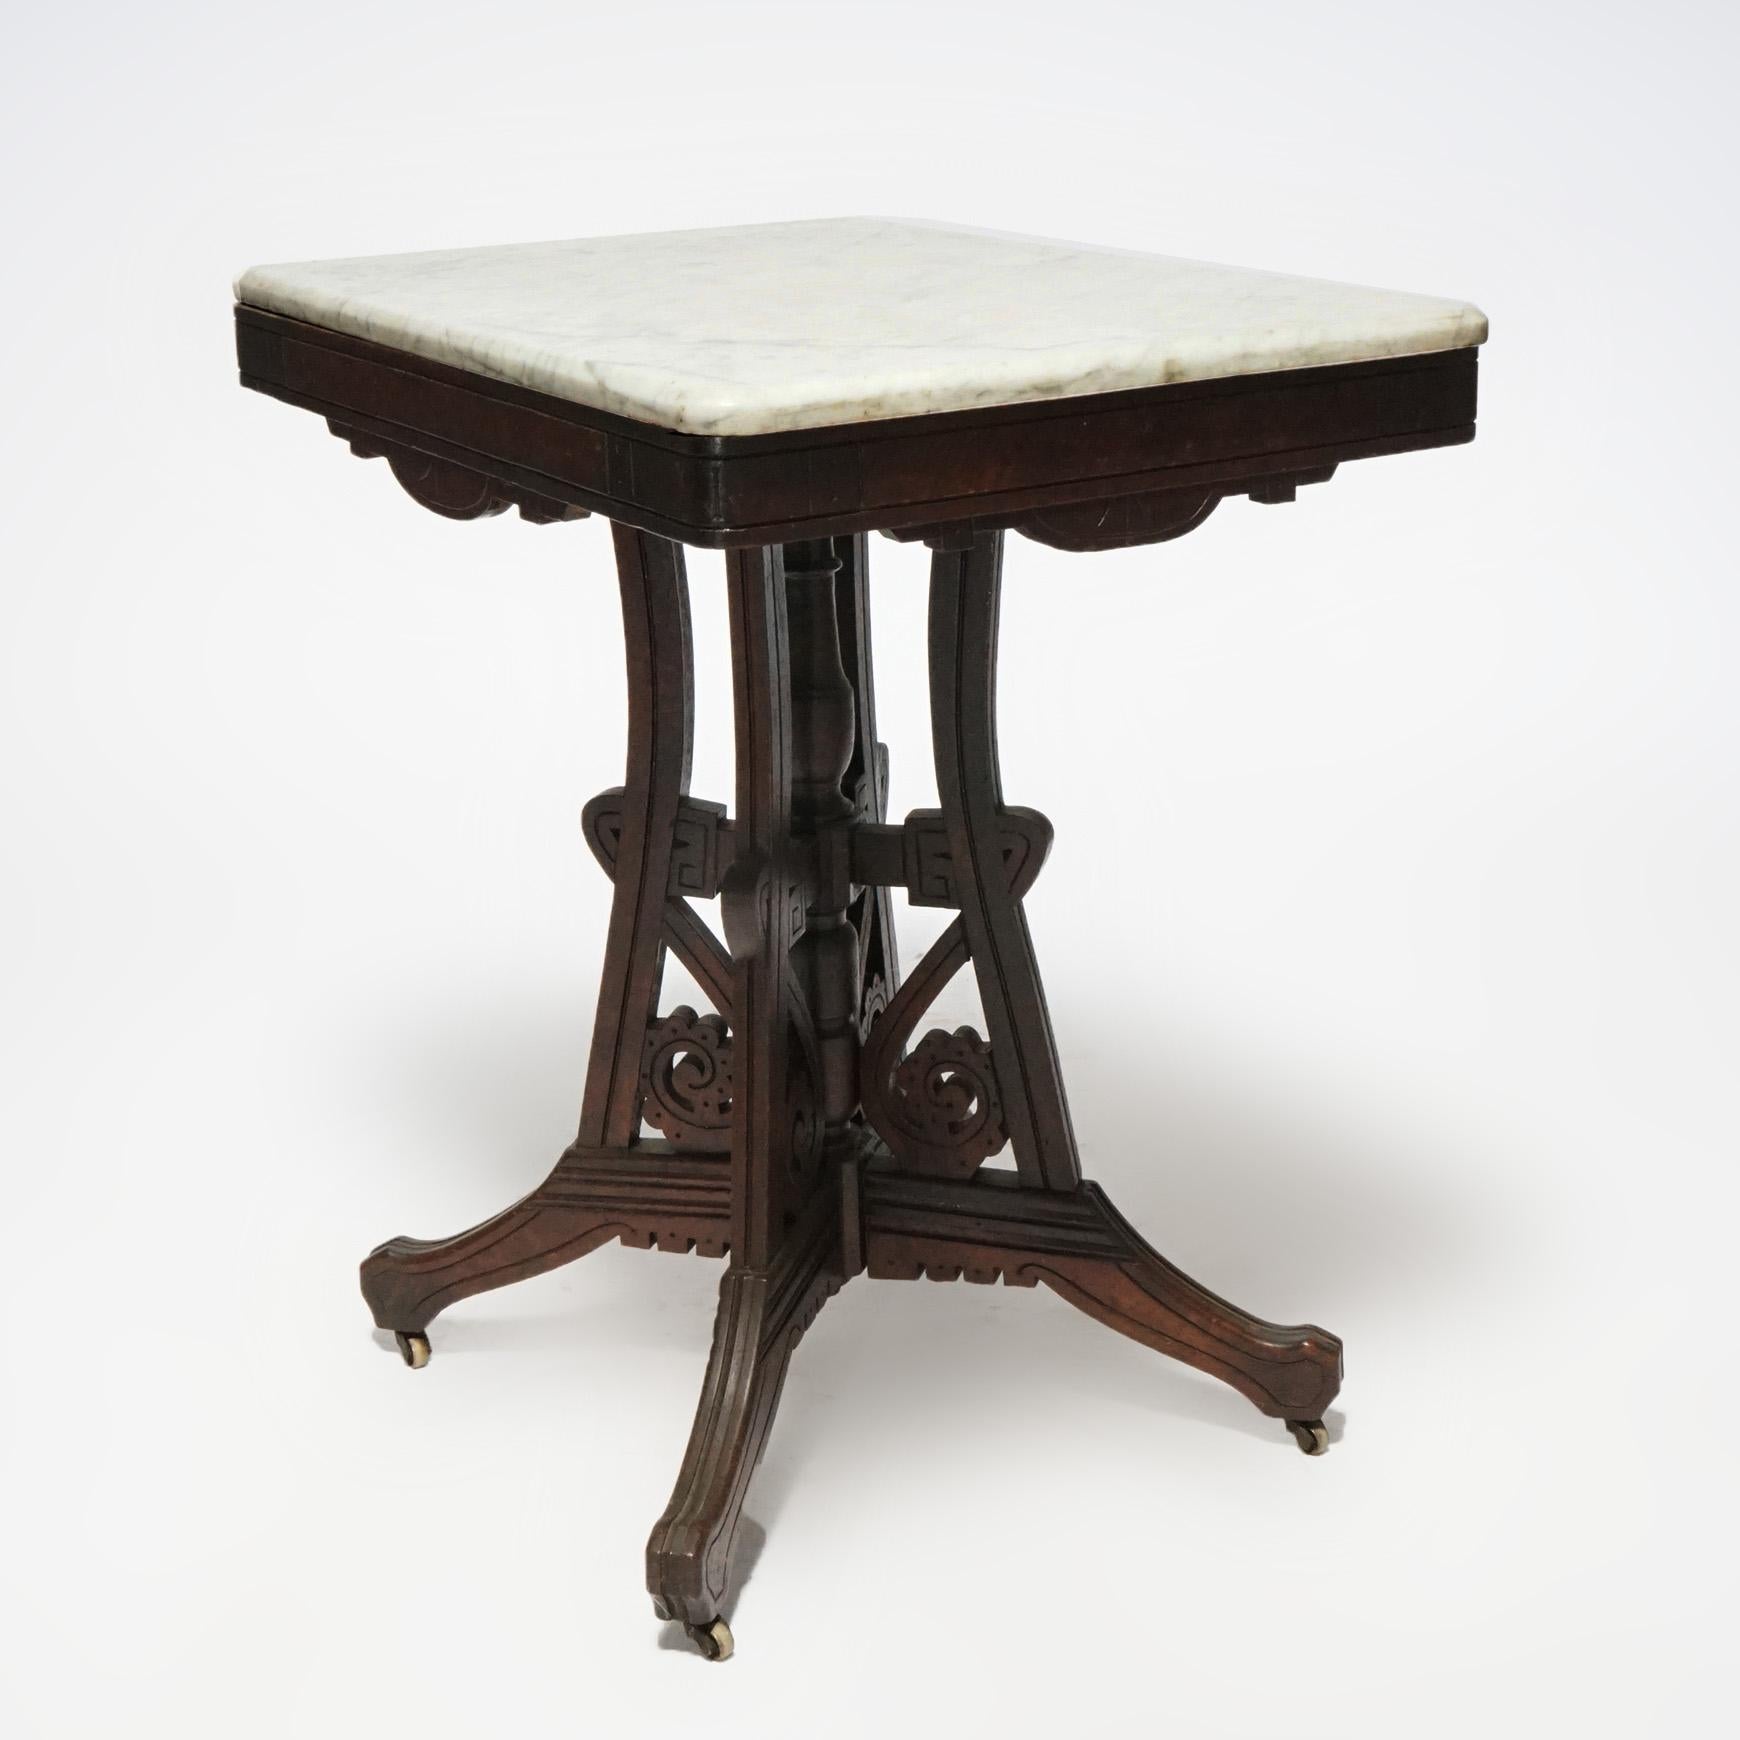 An antique Eastlake parlor table offers beveled marble top over walnut base having shaped skirt with burl insets, four concave supports having scroll form elements and central turned column, incised decoration throughout, c1890.

Measures- 29.5''H x